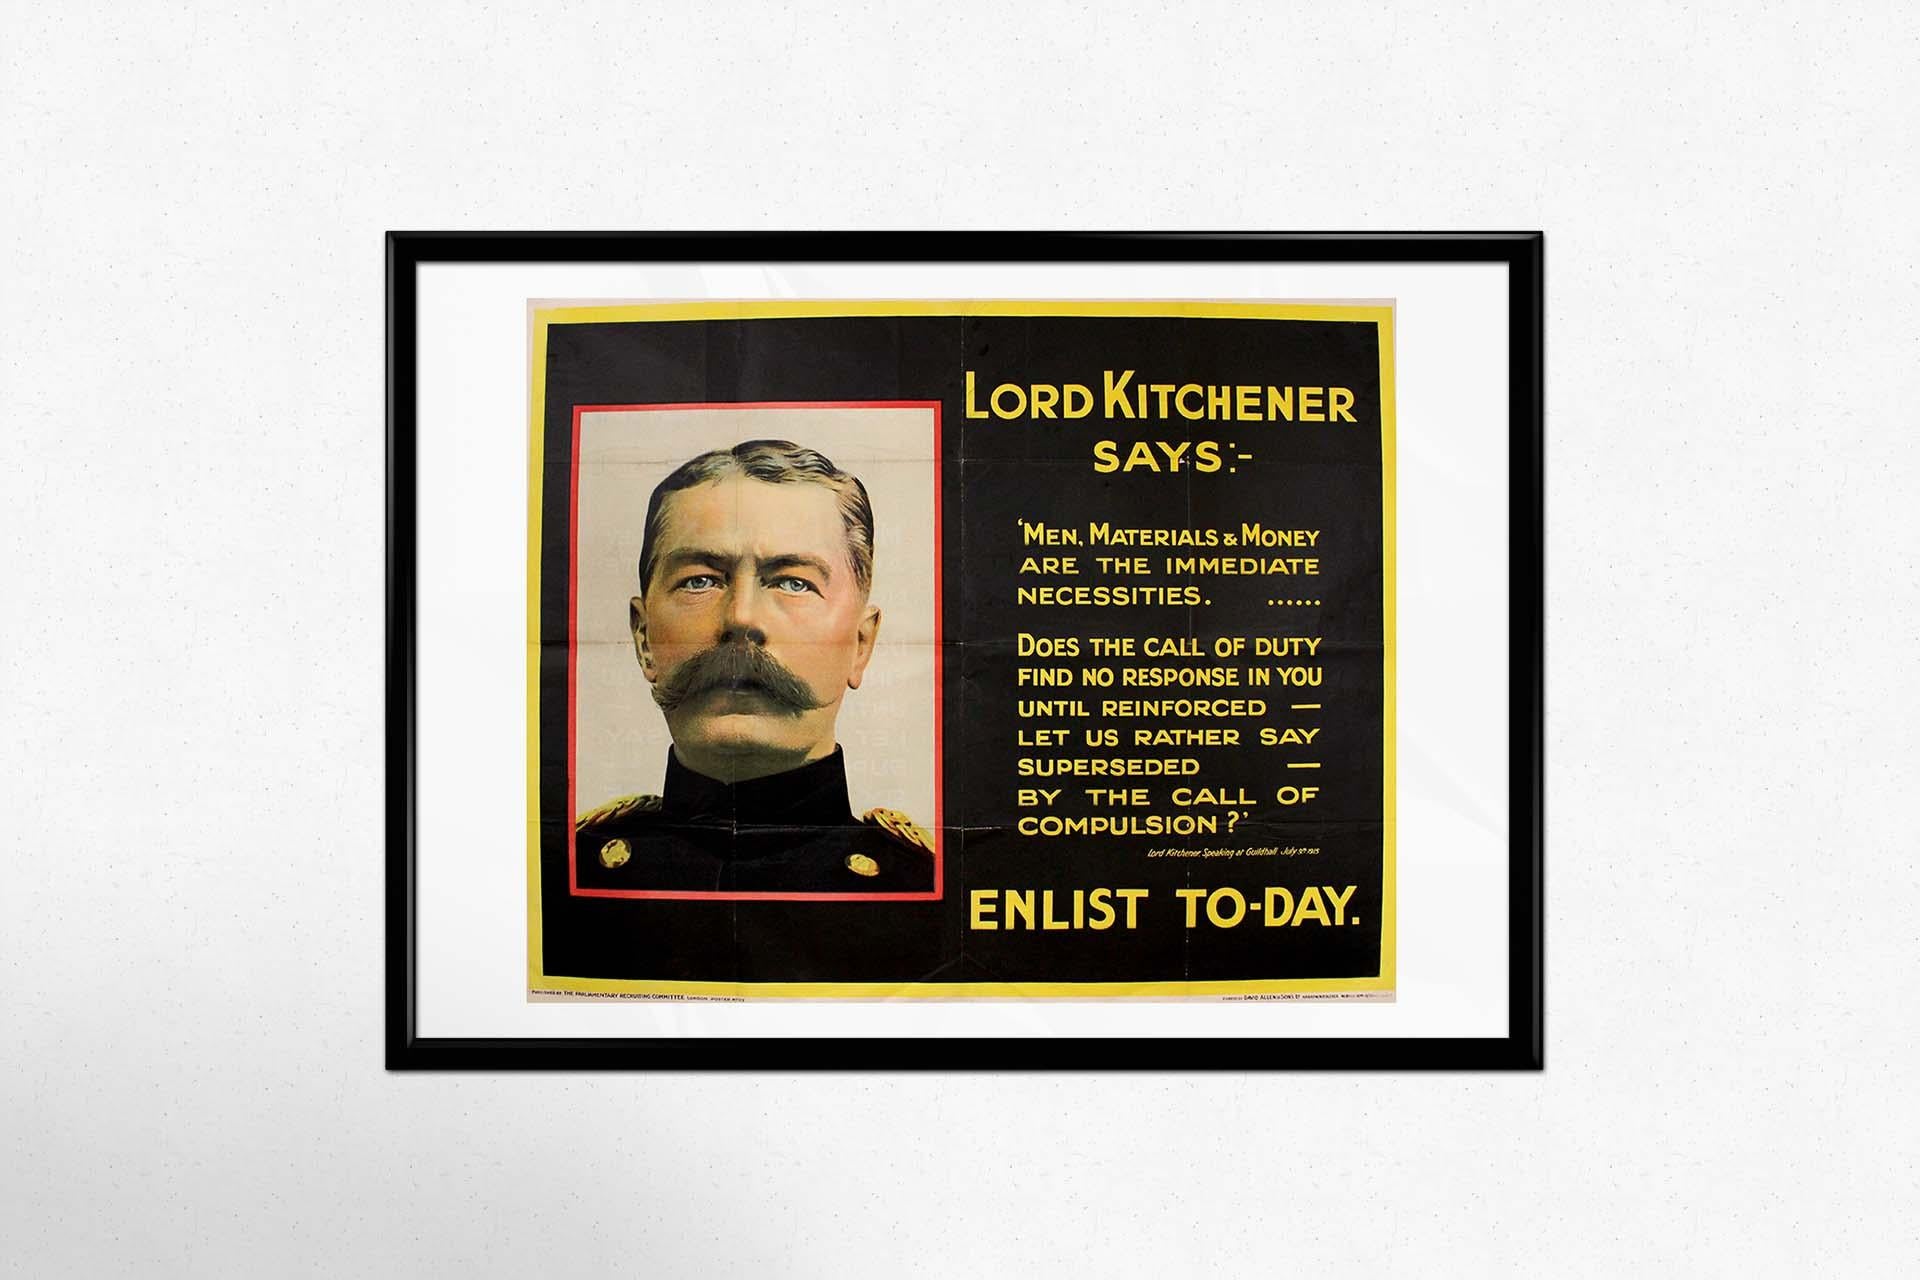 The original 1915 poster featuring Lord Kitchener's iconic proclamation serves as a powerful artifact of World War I propaganda, encapsulating the urgency and fervor of the times. With the backdrop of the Great War raging across Europe, governments